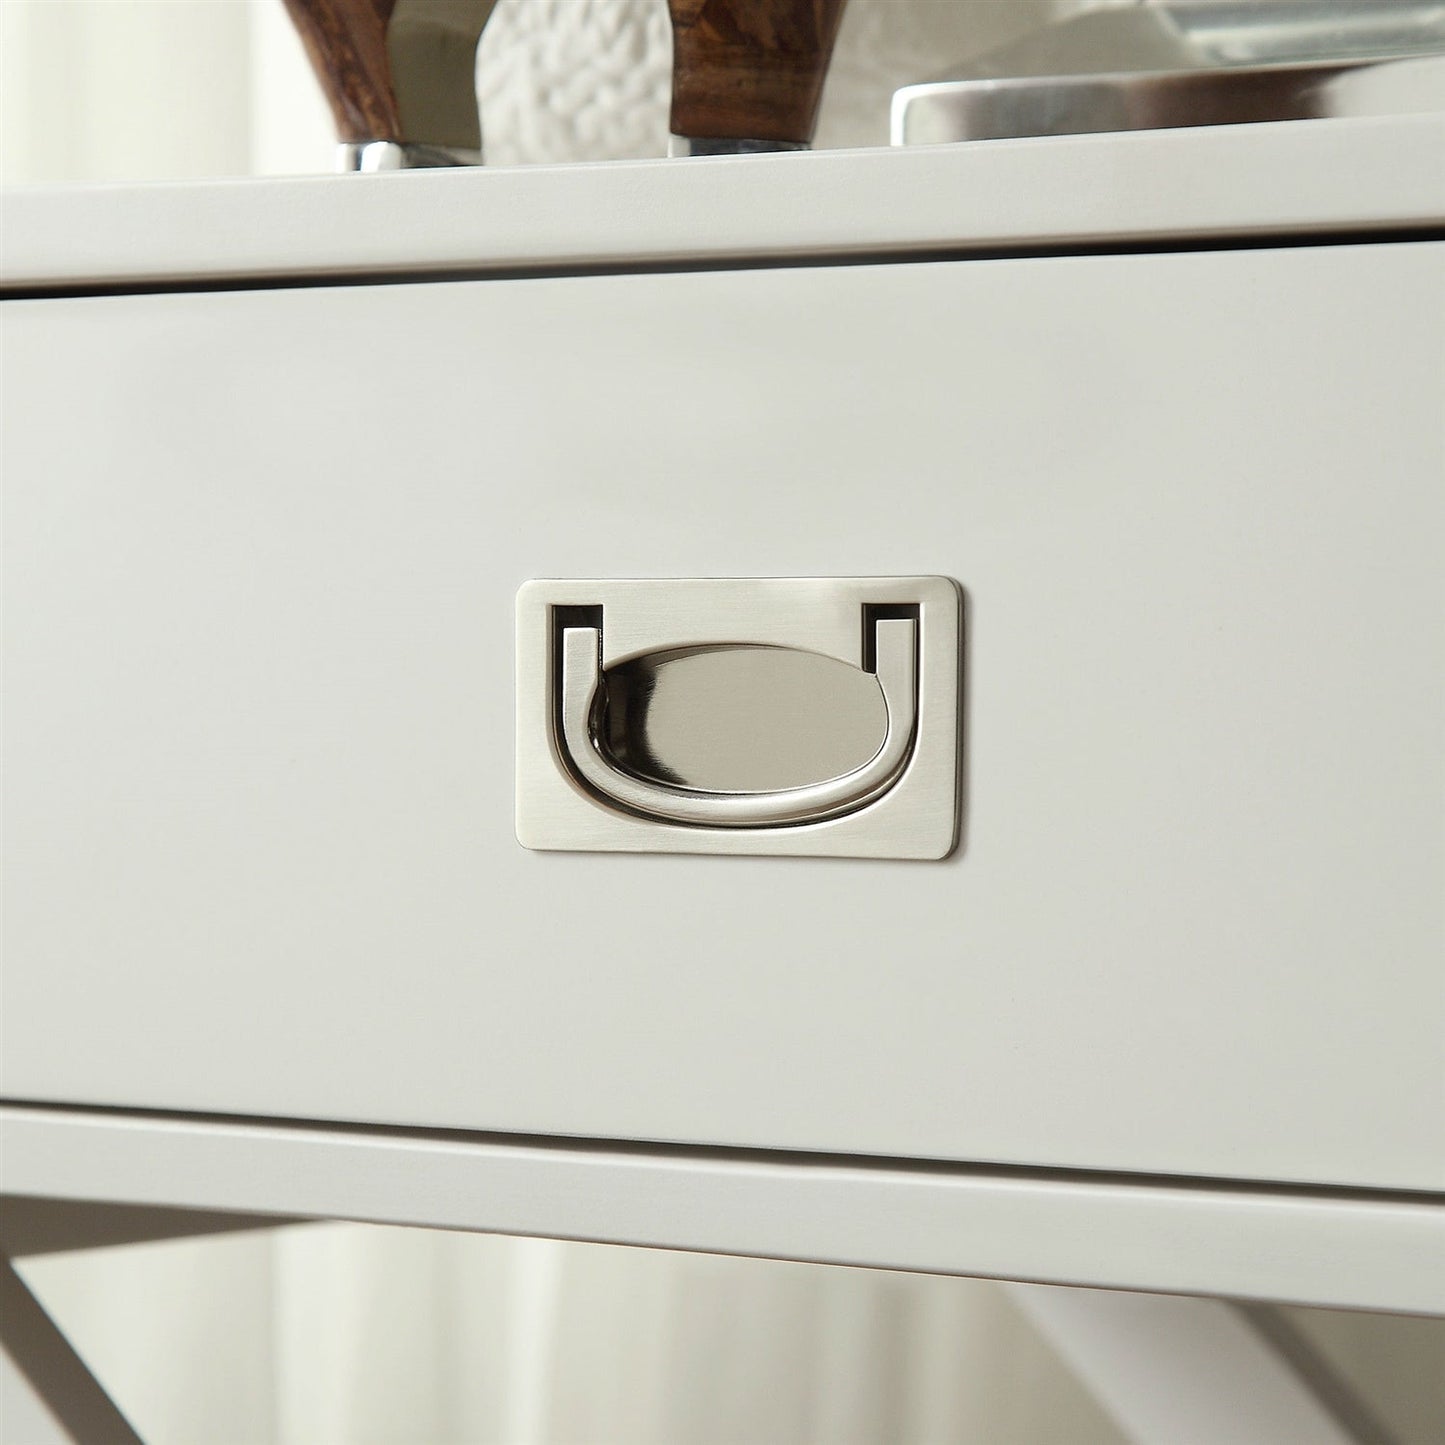 Bedroom > Nightstand And Dressers - White Modern Bedroom Decor 1-Drawer Bedside Table Nightstand End Table